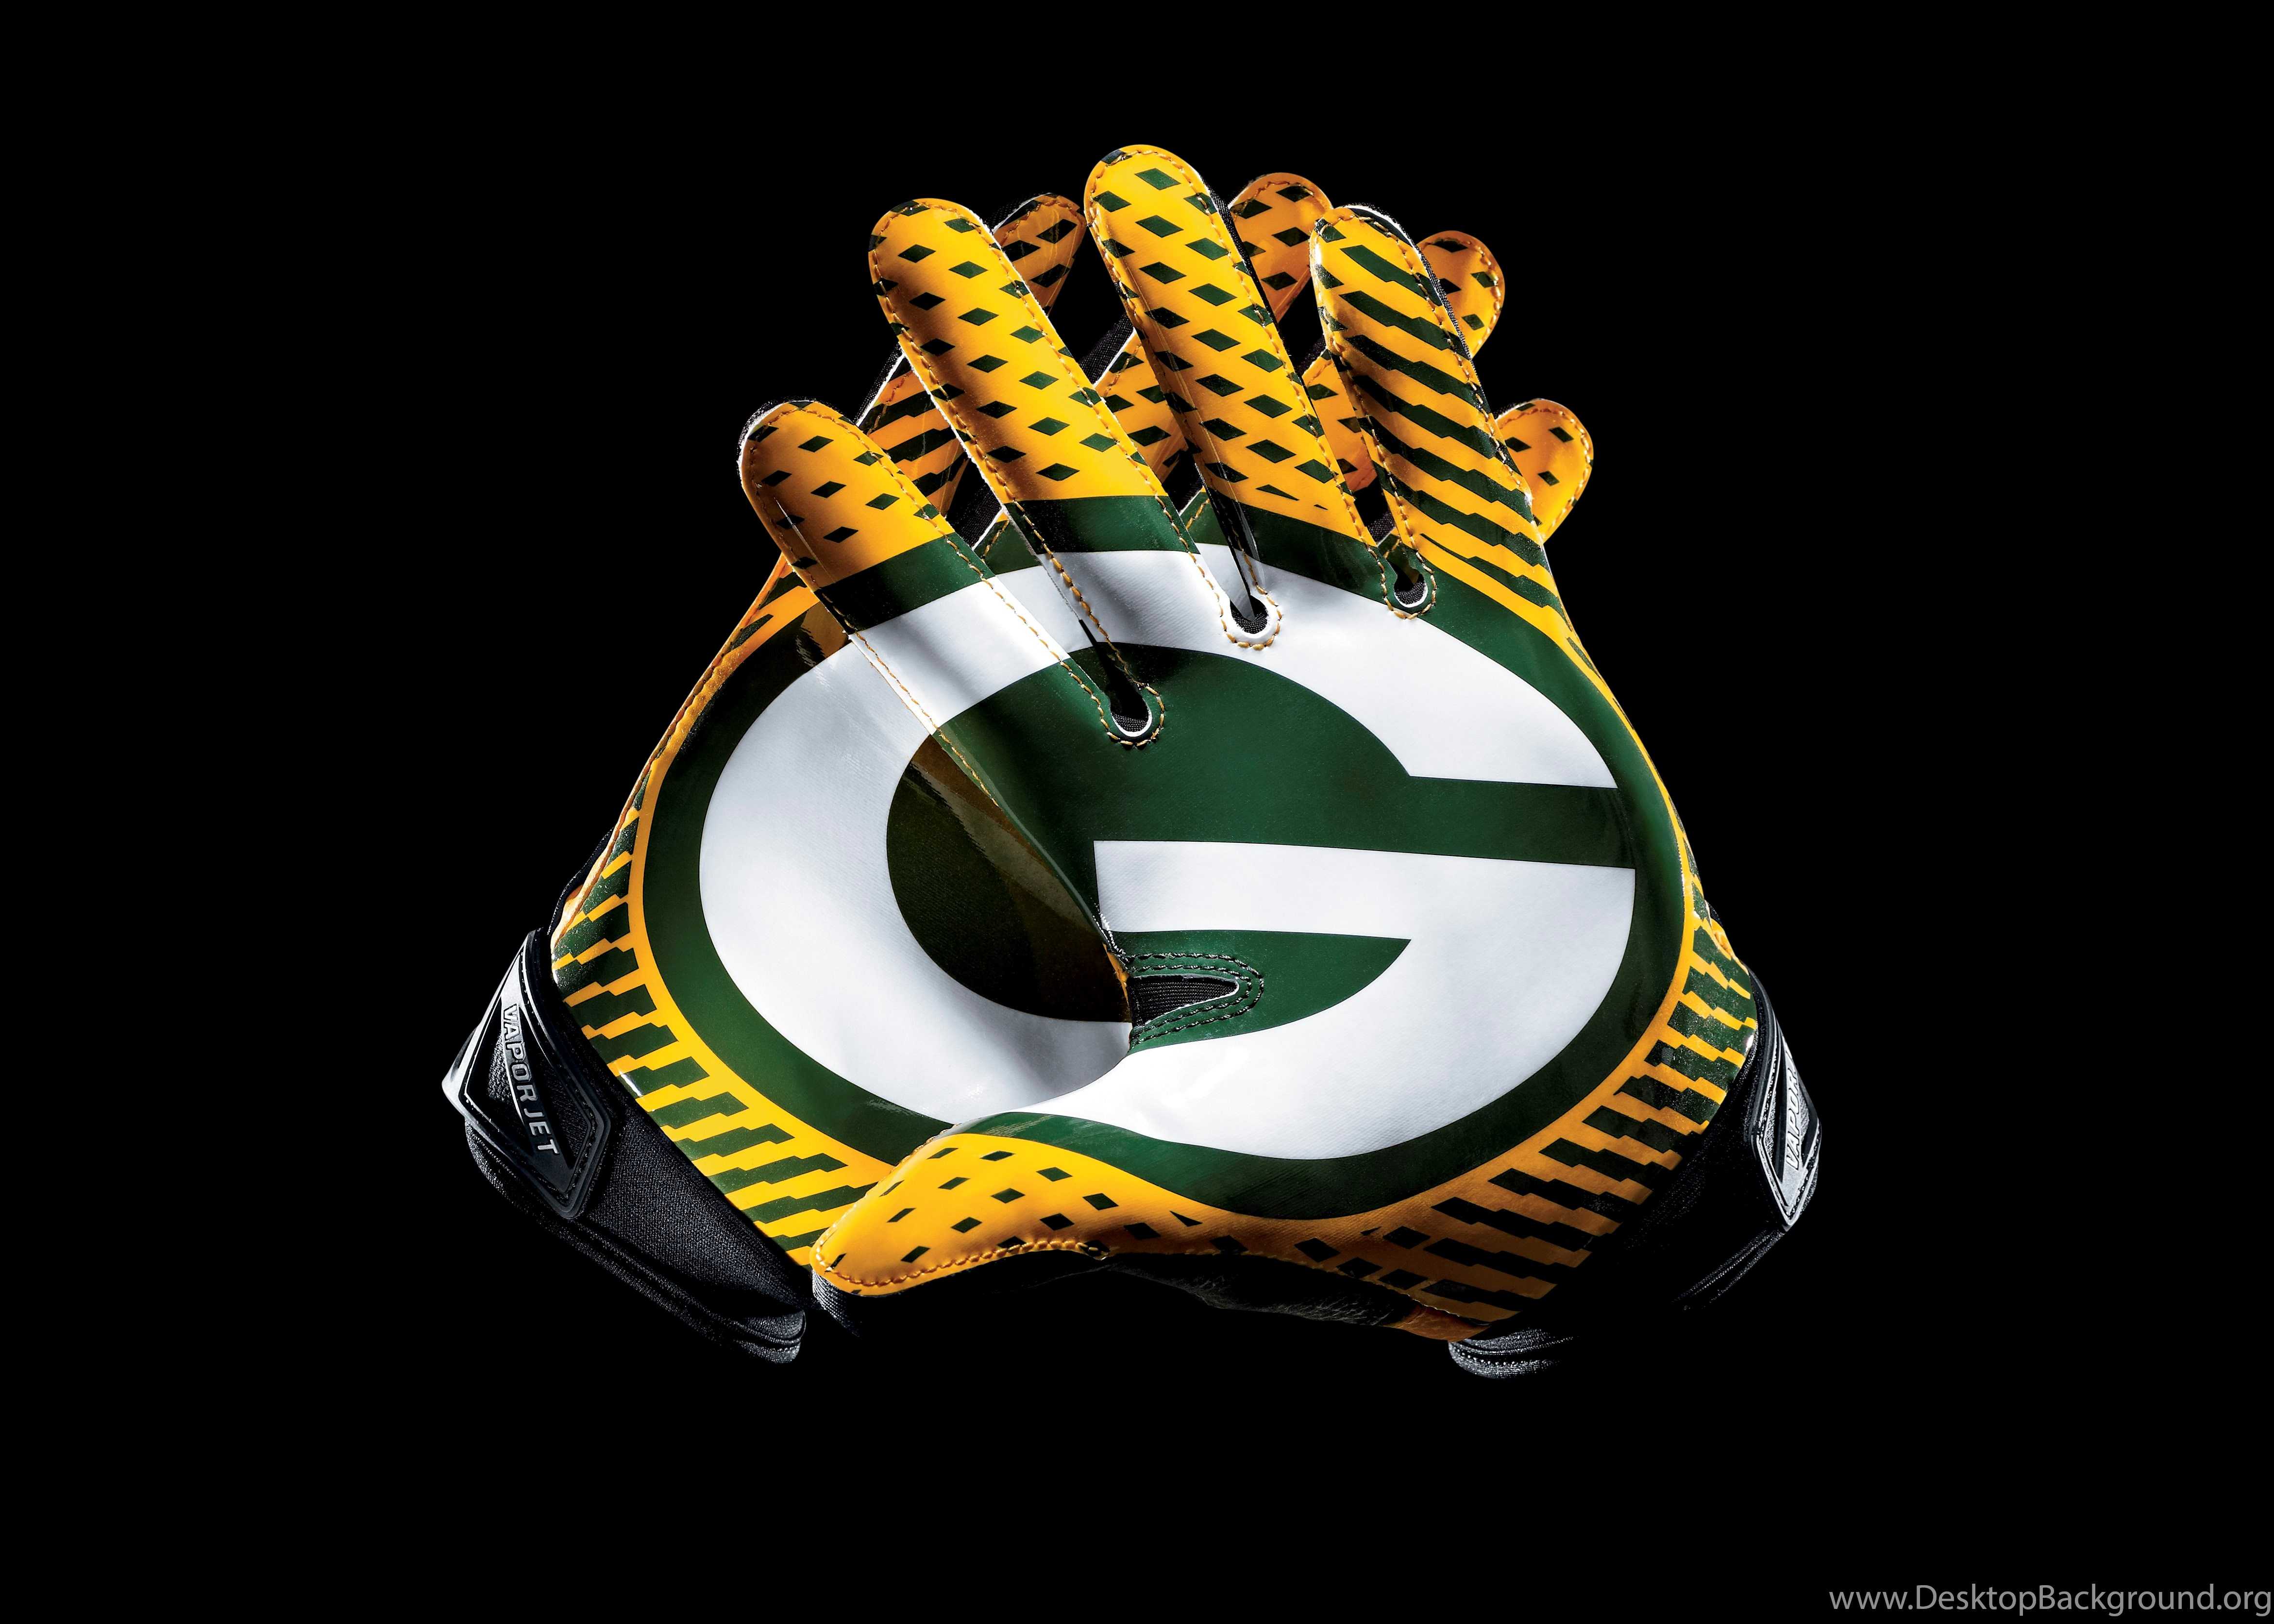 Green Bay Packers Wallpapers - Top Free